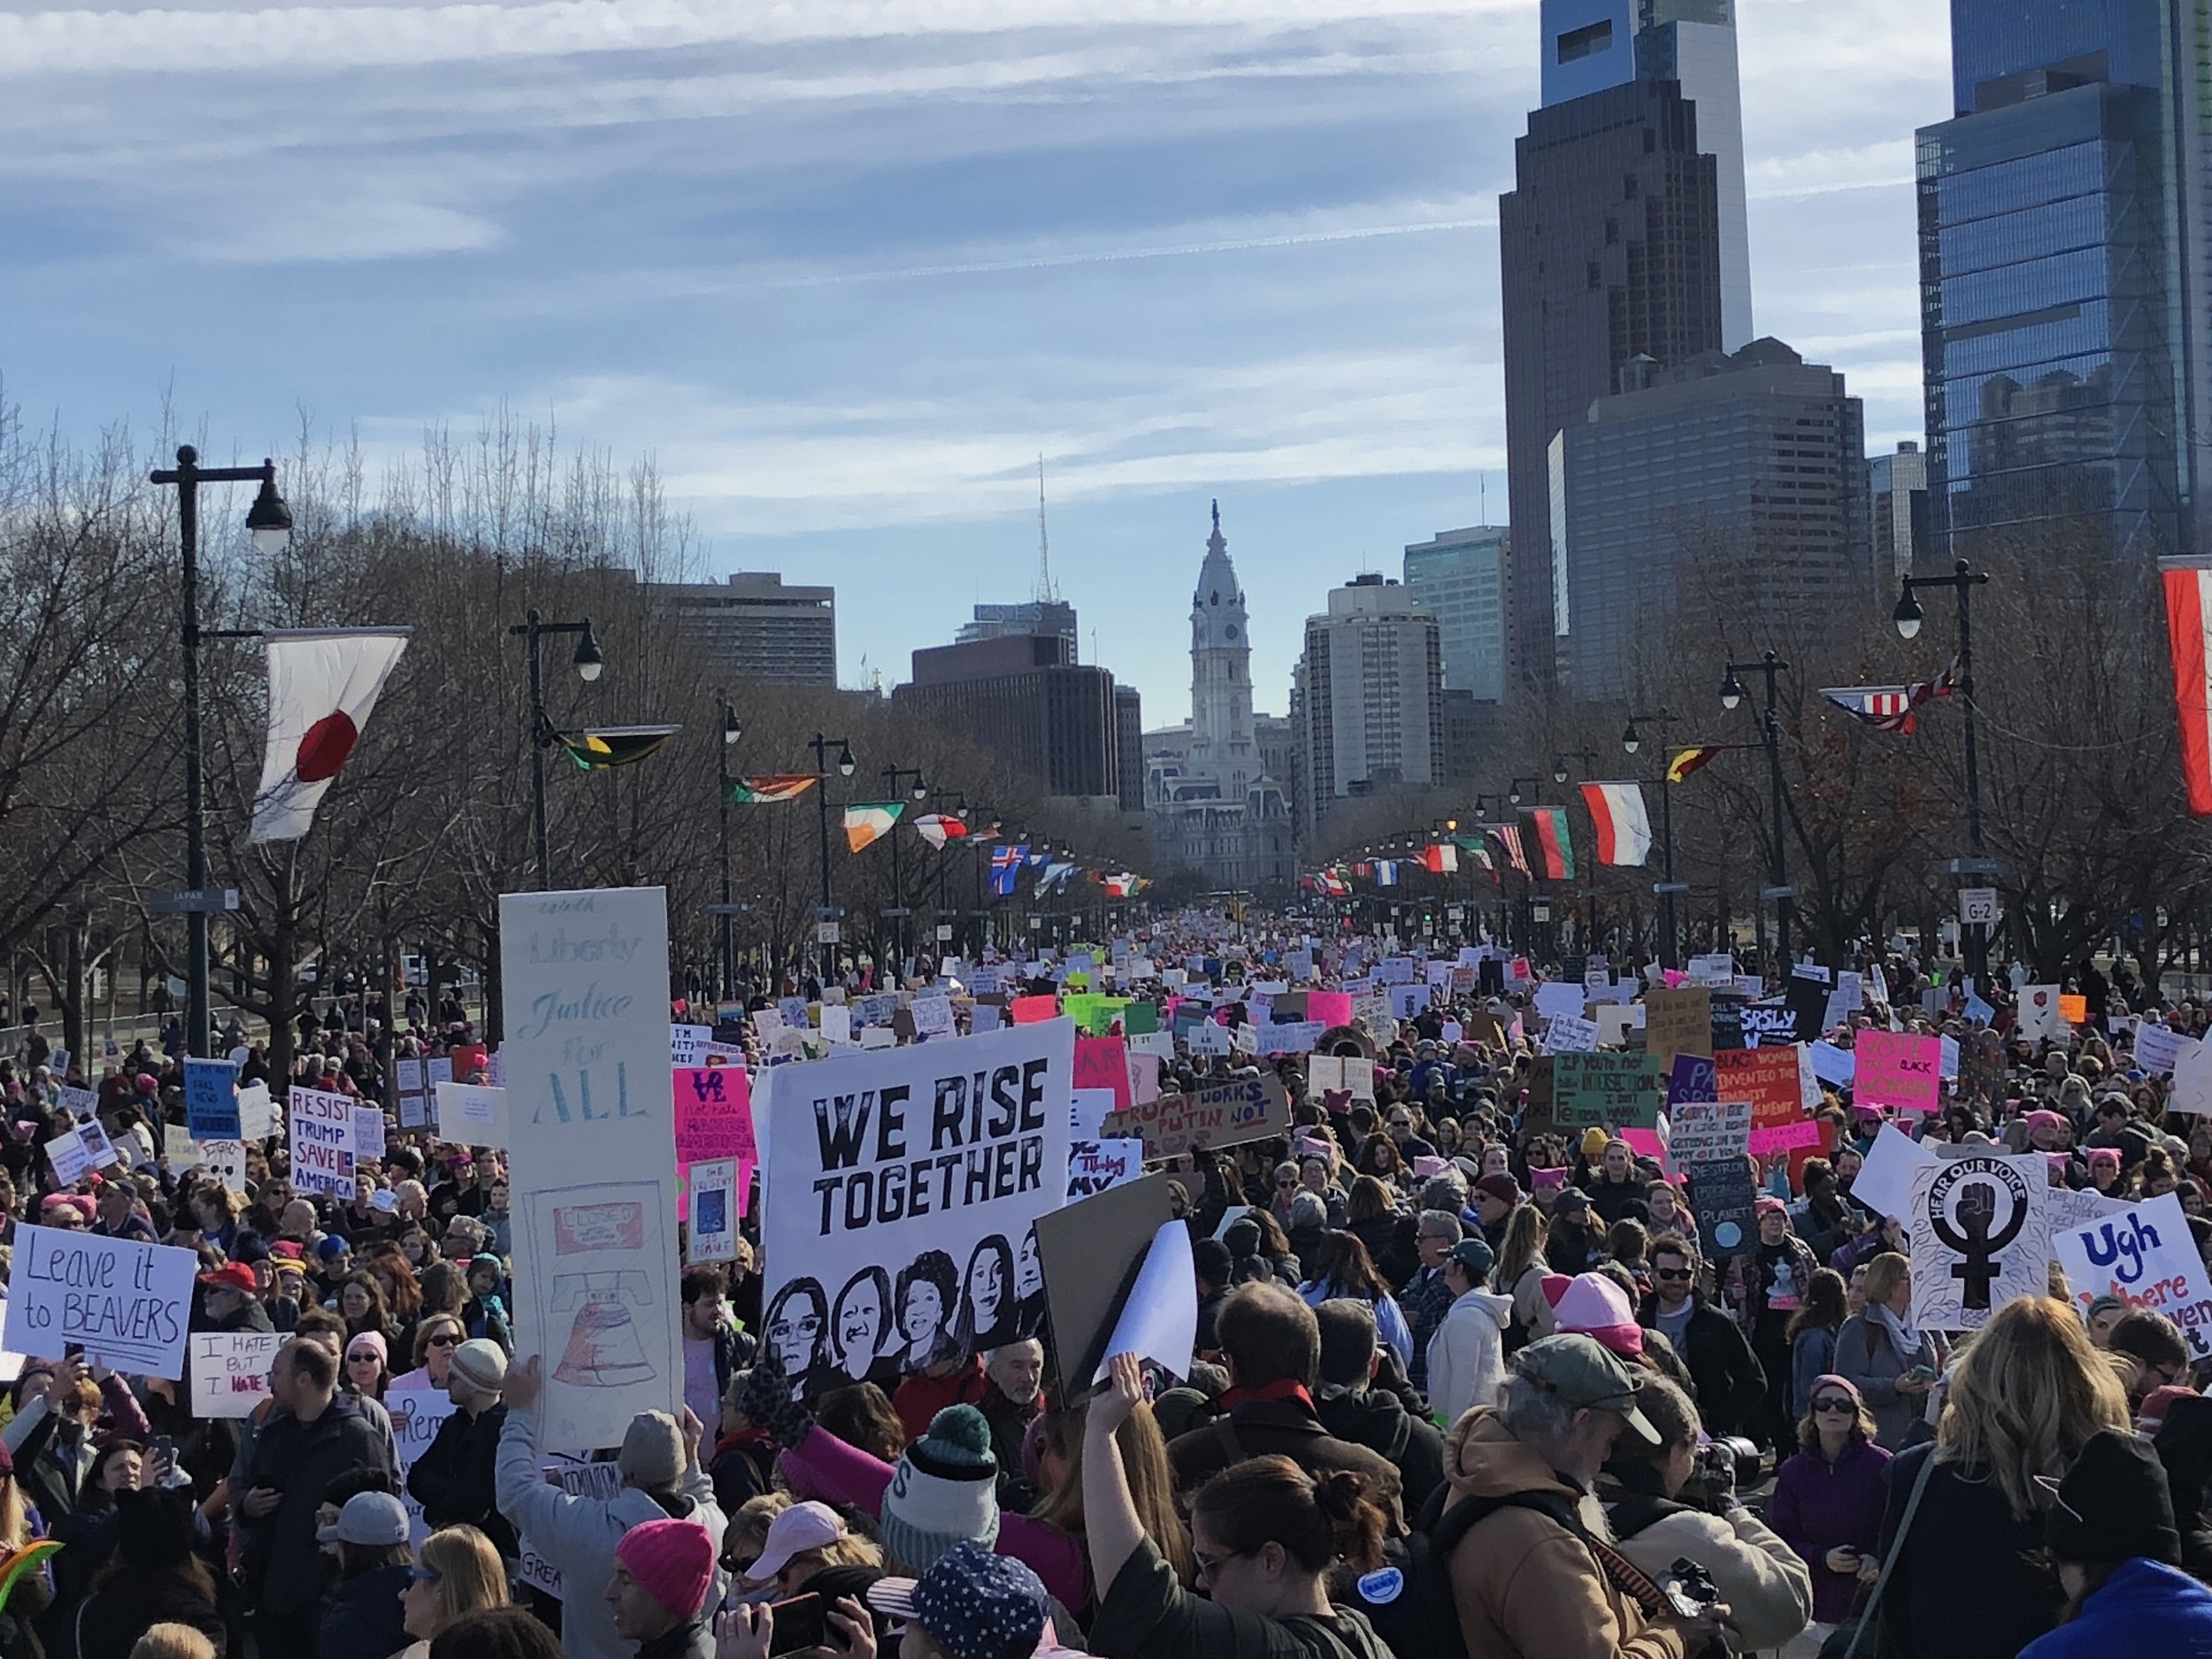  On January 20, 2018, members of H-CAN joined thousands on the Benjamin Franklin Parkway at the Philadelphia Women's March. 